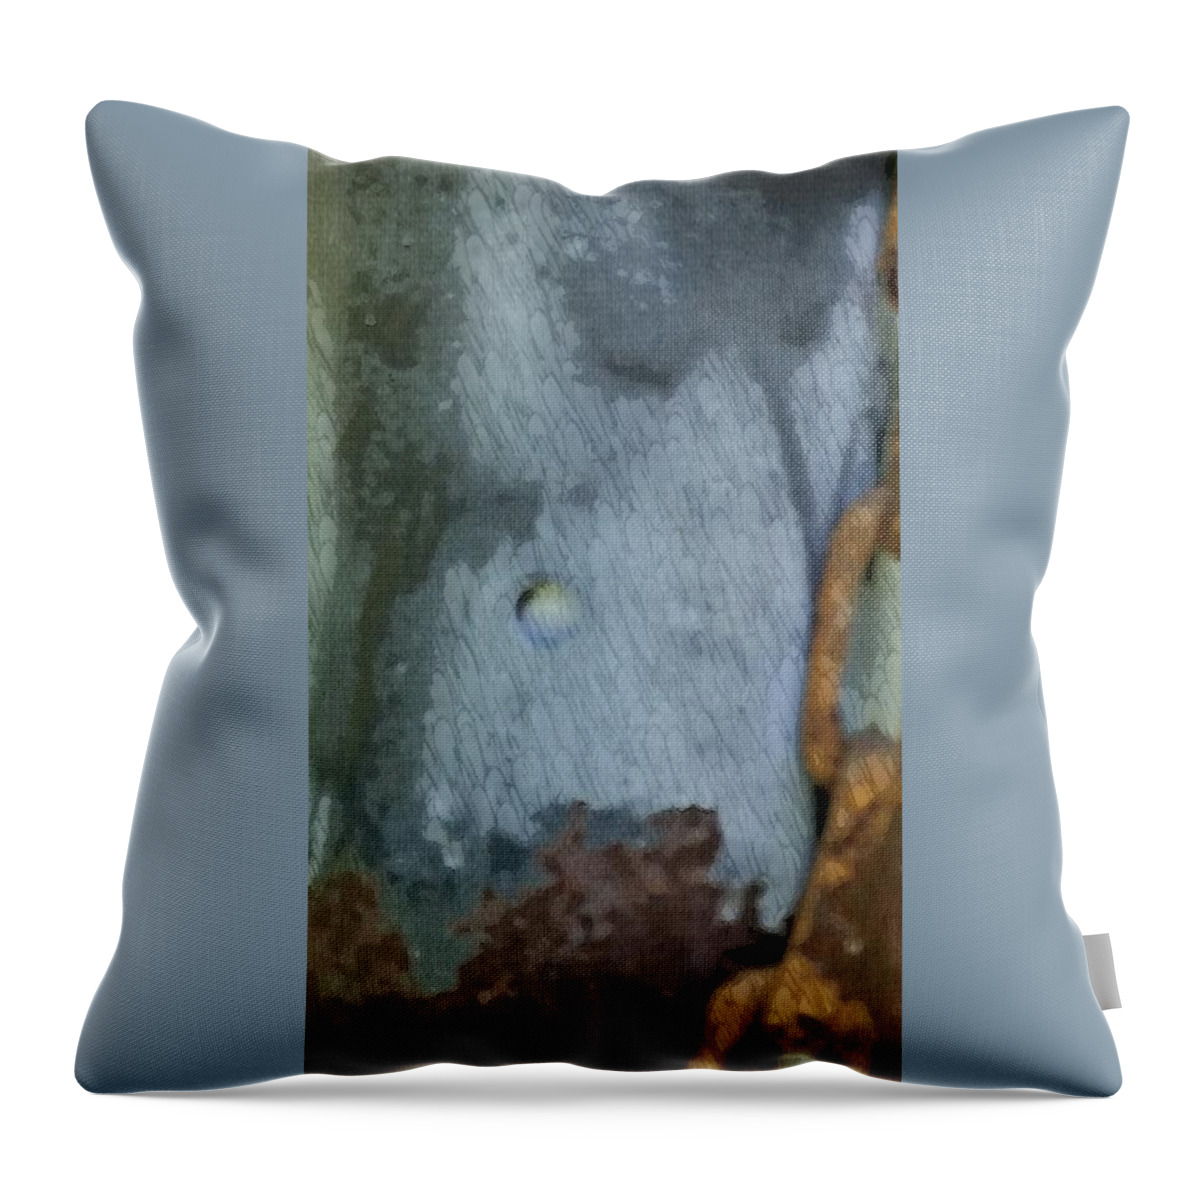 Steampunk Throw Pillow featuring the photograph The man in the mirror by Kimberly W